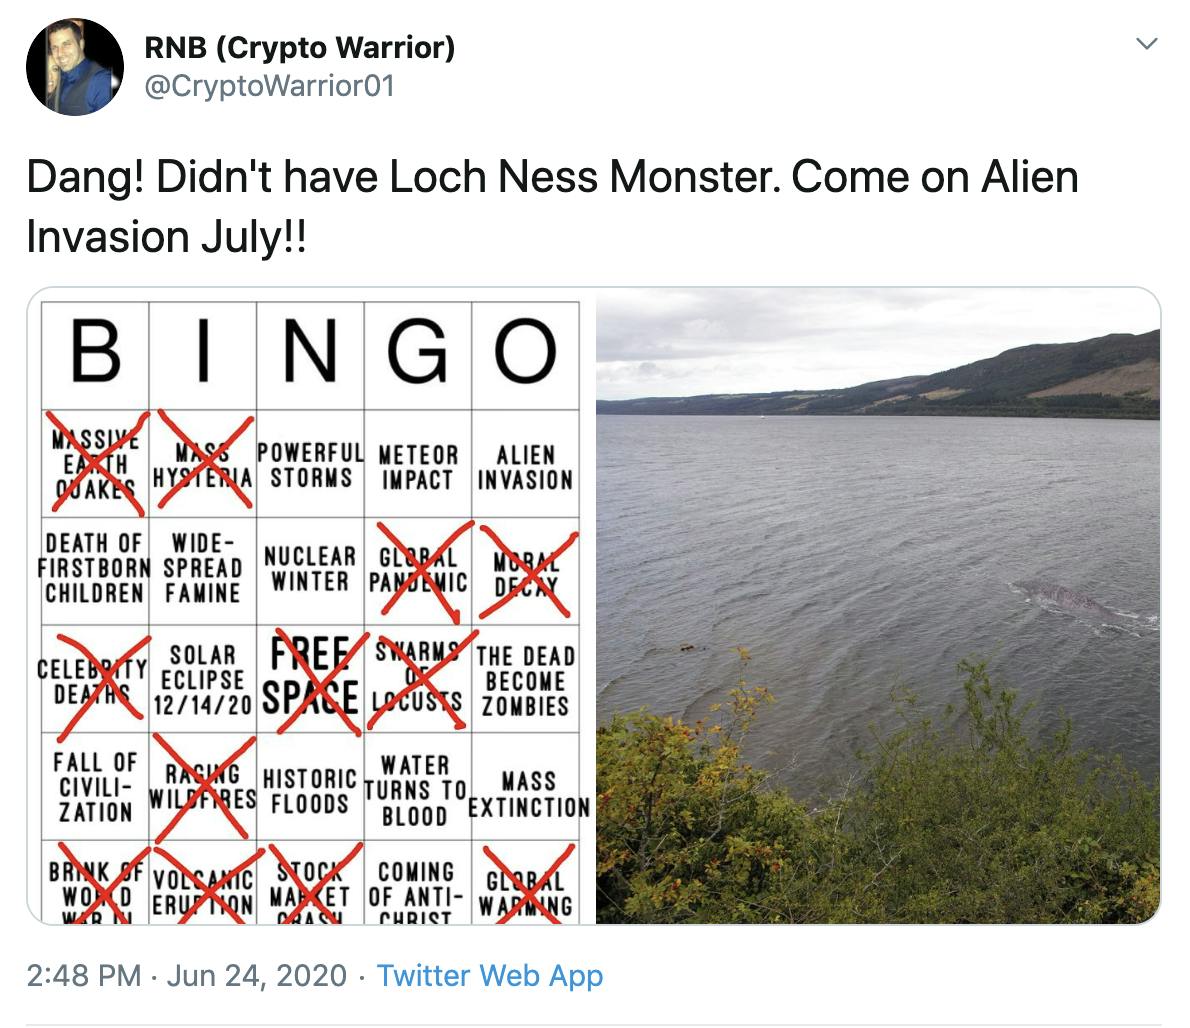 "Dang! Didn't have Loch Ness Monster. Come on Alien Invasion July!!" followed by picture of filled out Bingo card and image of "Nessie"